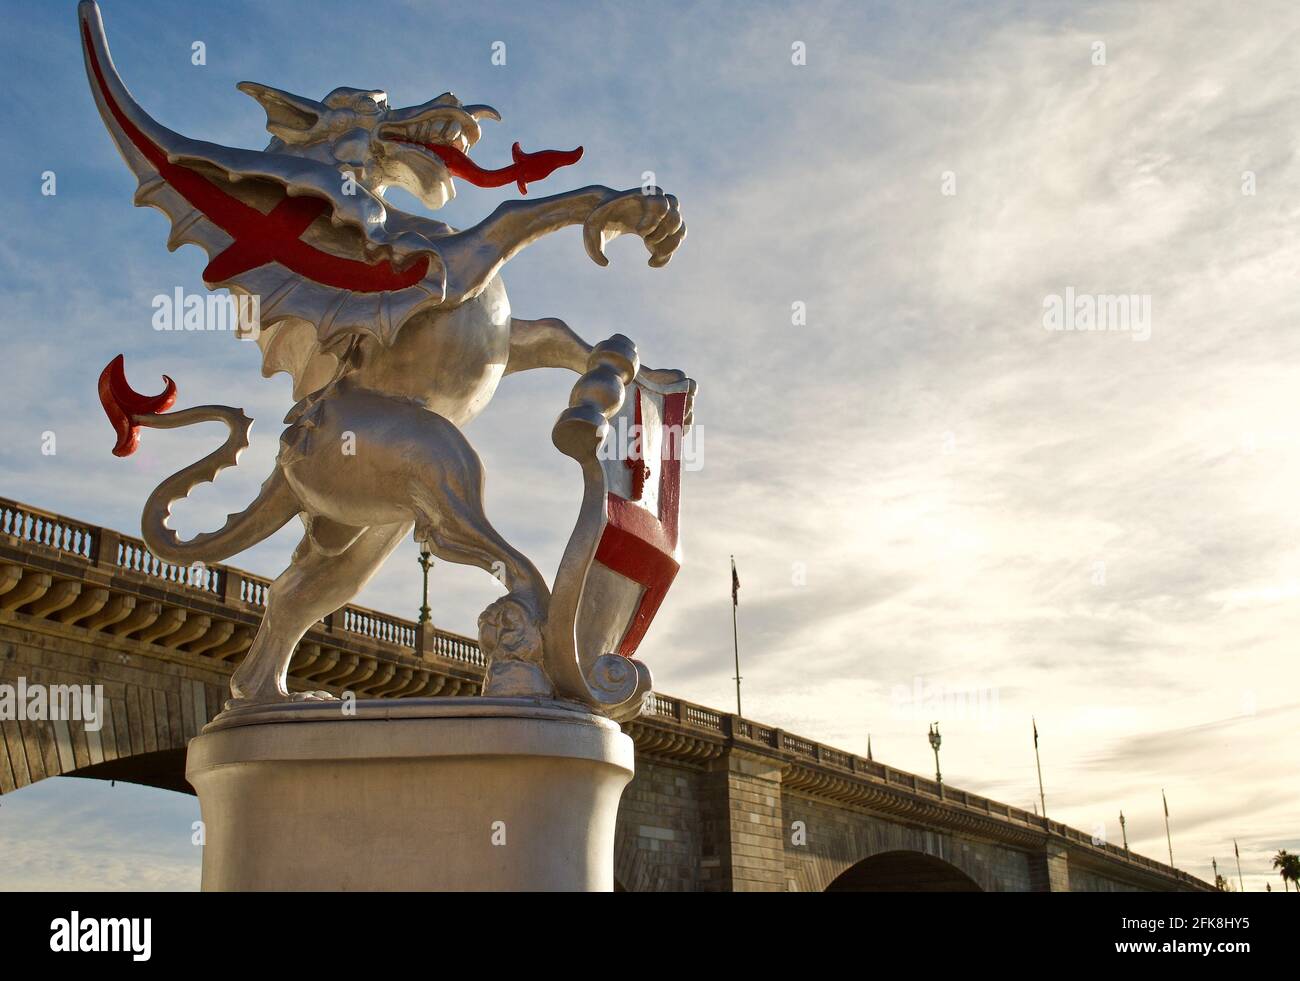 Lake Havasu City, Arizona: Replica Dragon Boundary Marker in front of the London Bridge. The red and silver dragons hold City of London's coat of arms Stock Photo